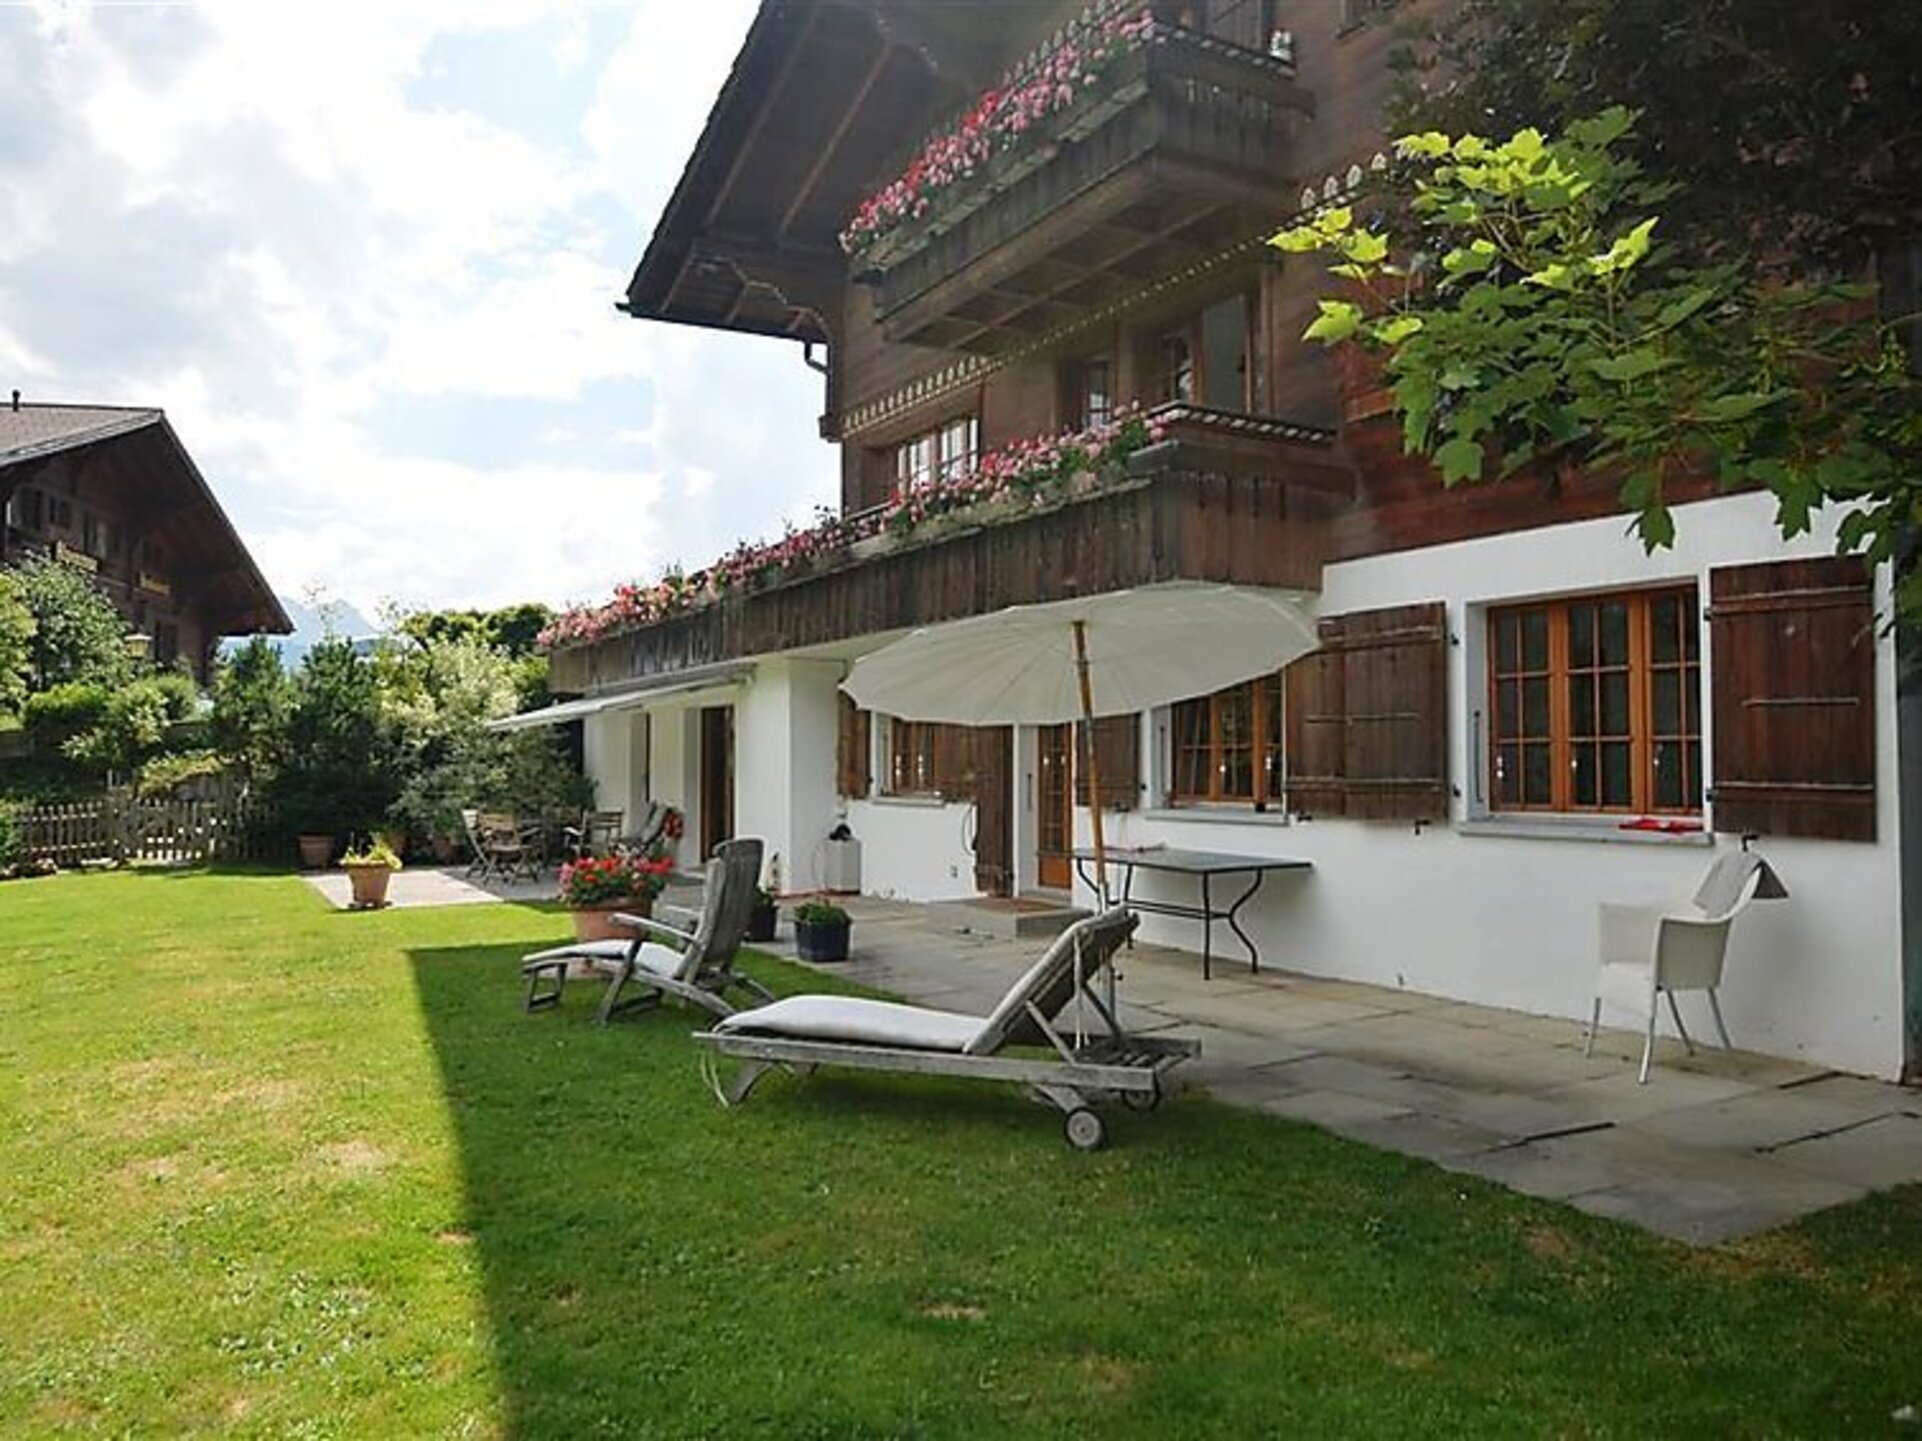 Property Image 1 - Property Manager Villa with First Class Amenities, Bern Villa 1020